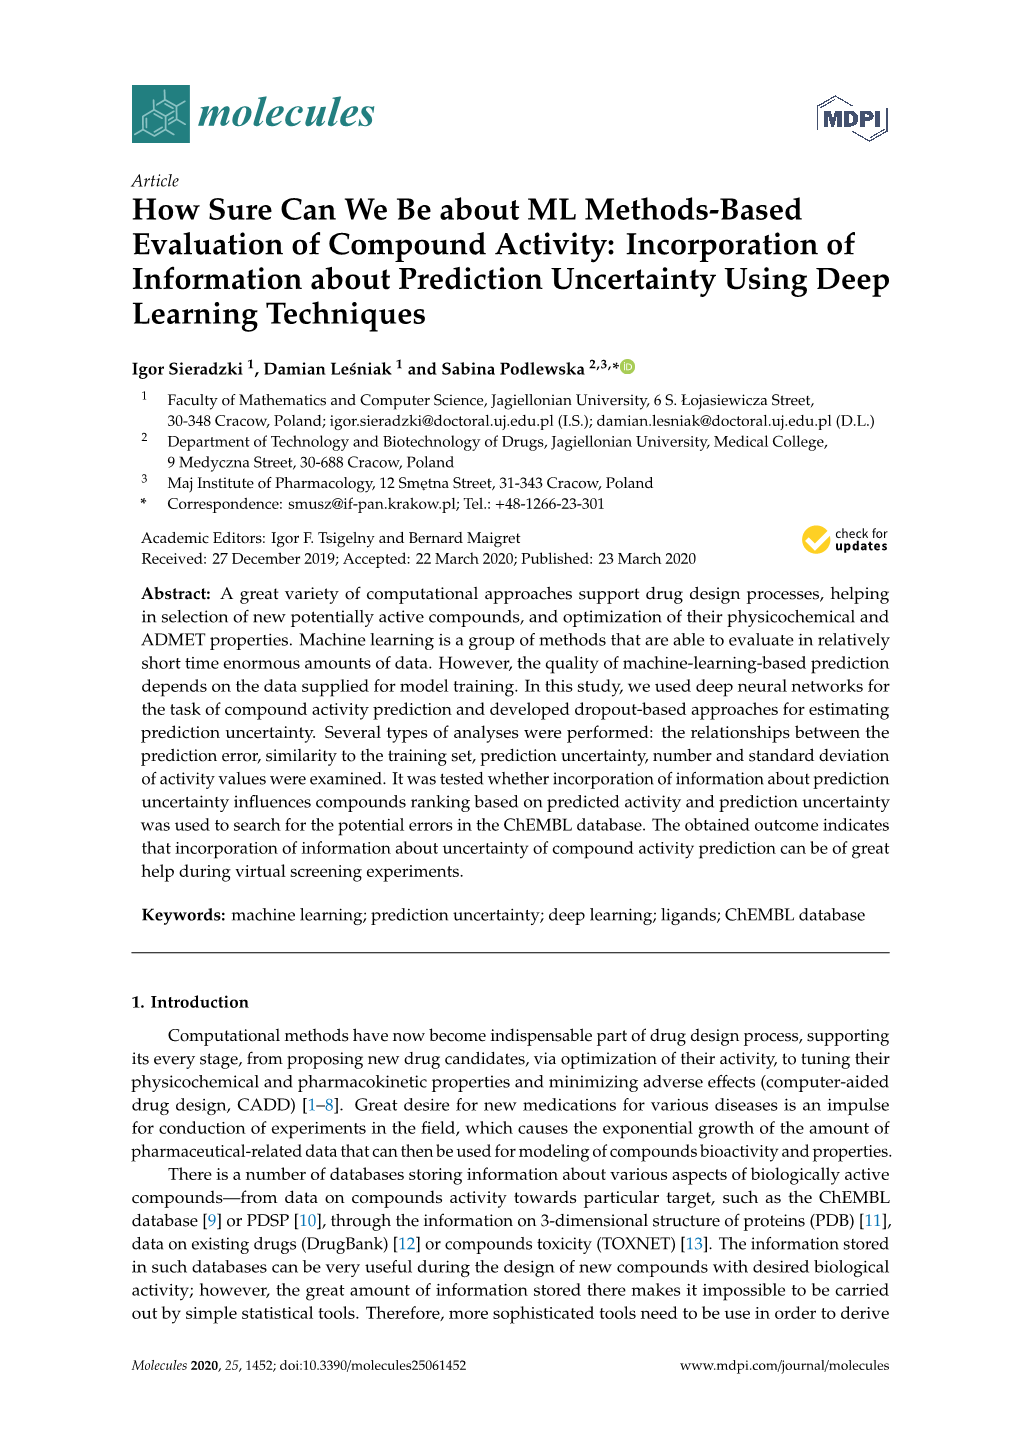 How Sure Can We Be About ML Methods-Based Evaluation of Compound Activity: Incorporation of Information About Prediction Uncertainty Using Deep Learning Techniques